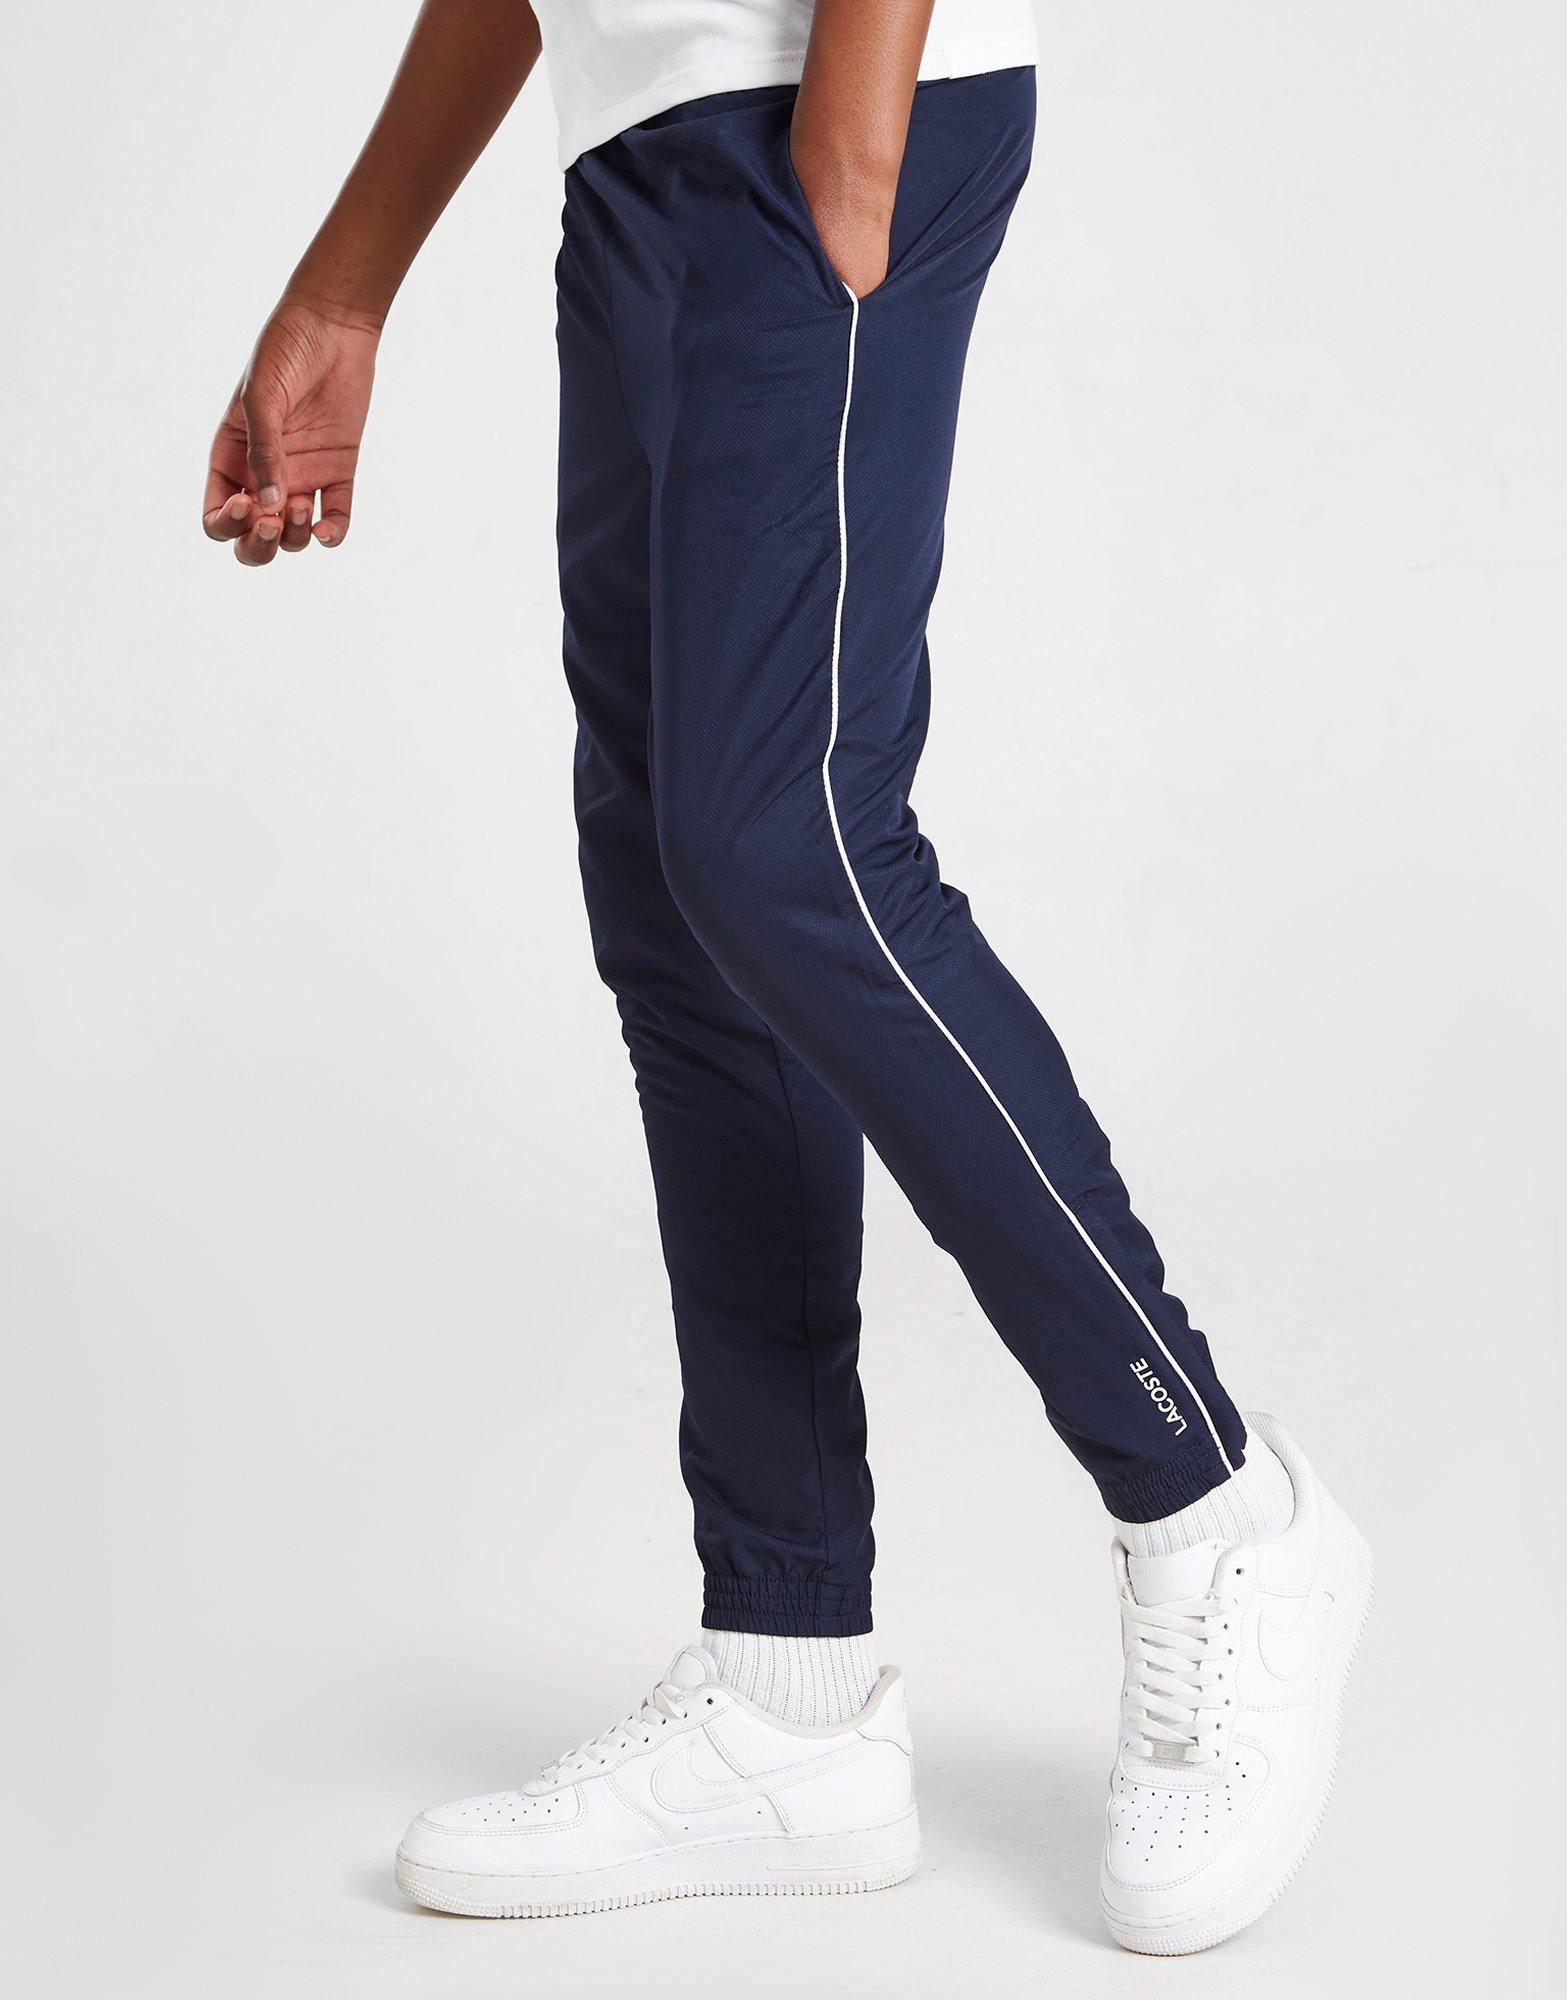 lacoste tape woven track pants junior